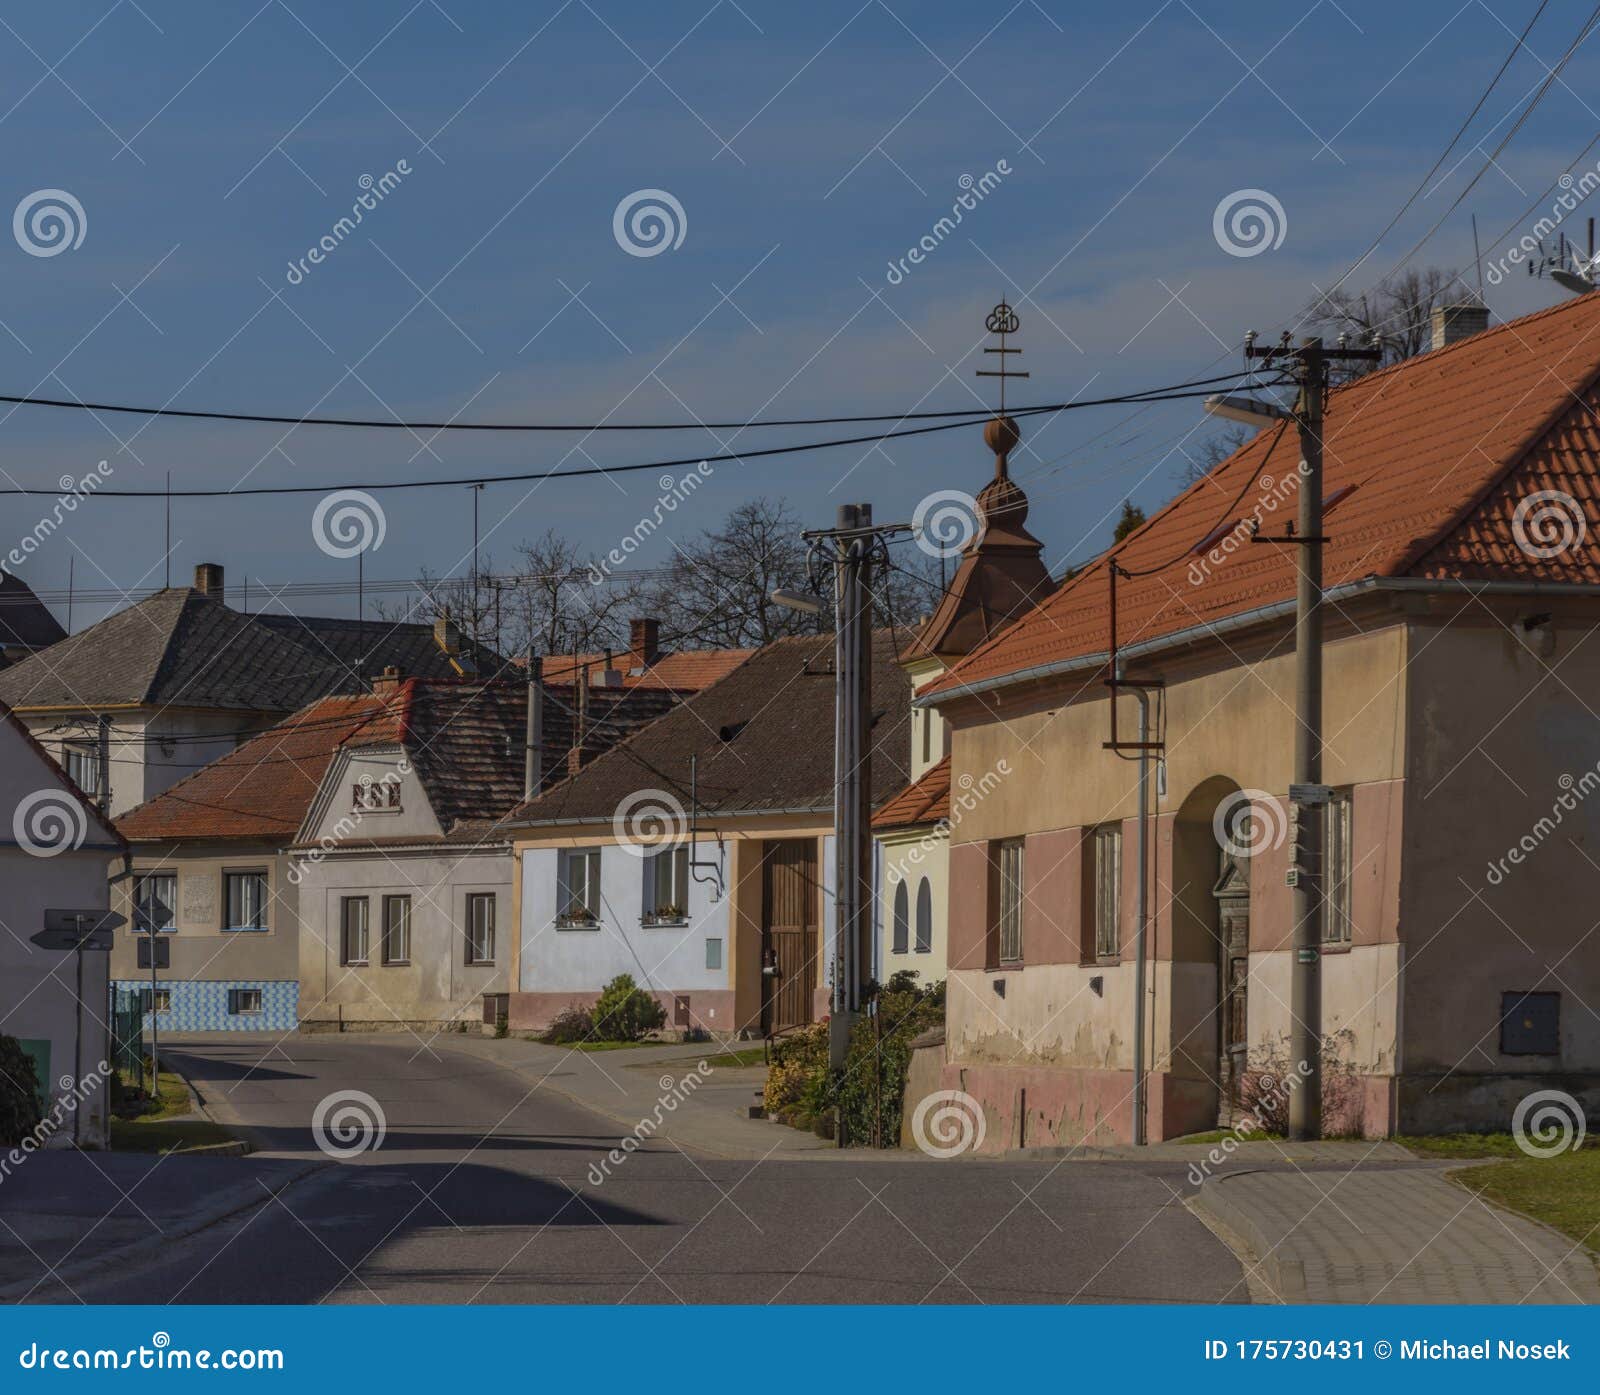 Typical Czech Road in Village in Sunny Winter Blue Sky Day Stock Image ...